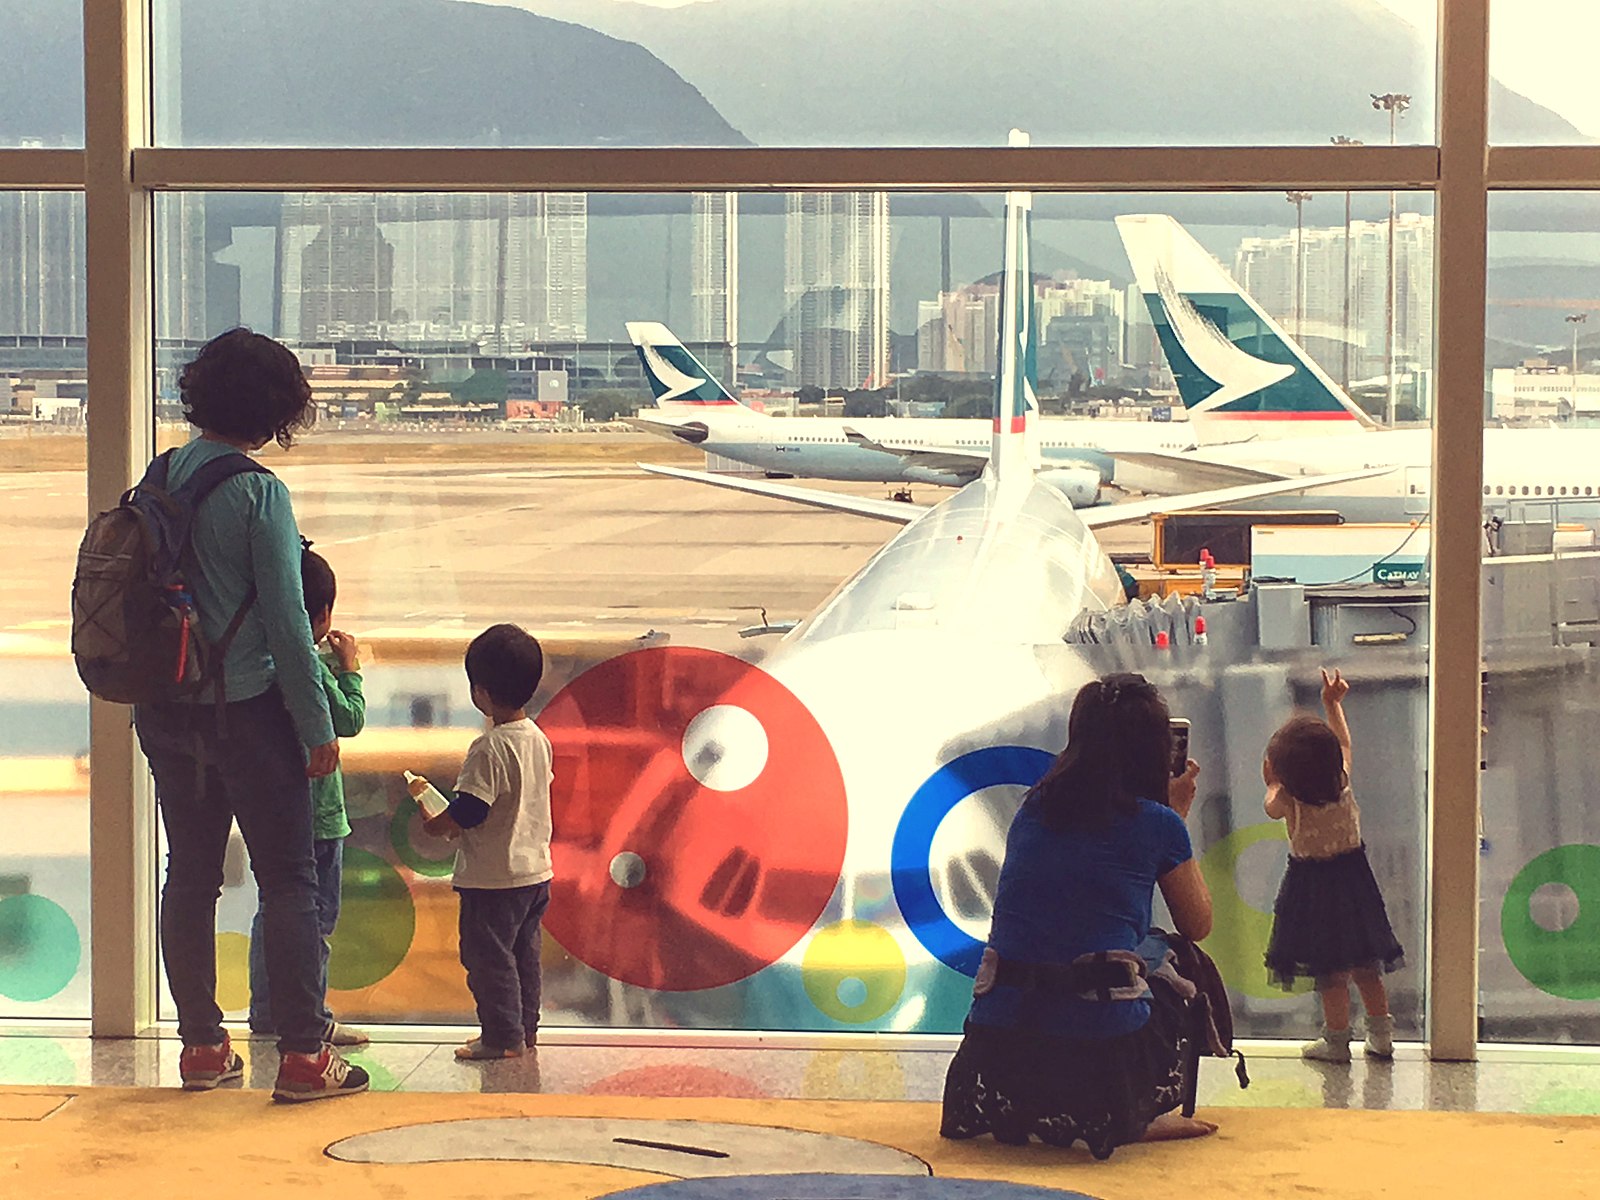 Two mothers and their children stand with their backs to the camera looking out the window at an airport. The family on the left has two children and the family on the right has one toddler, who is reaching up towards the window while the mother takes a picture.